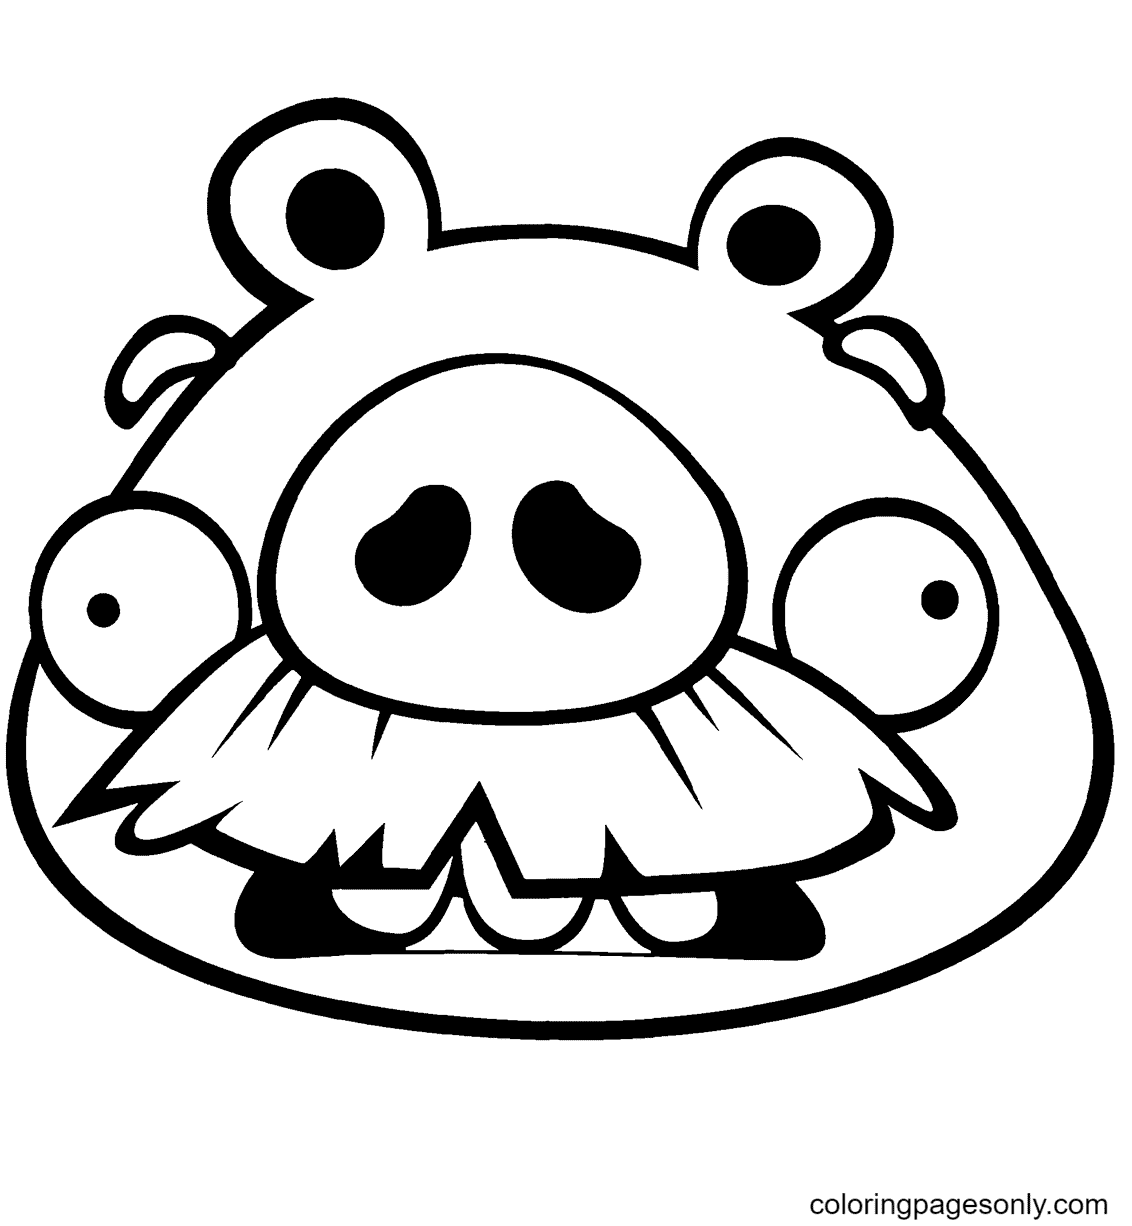 Foreman Pig Coloring Page